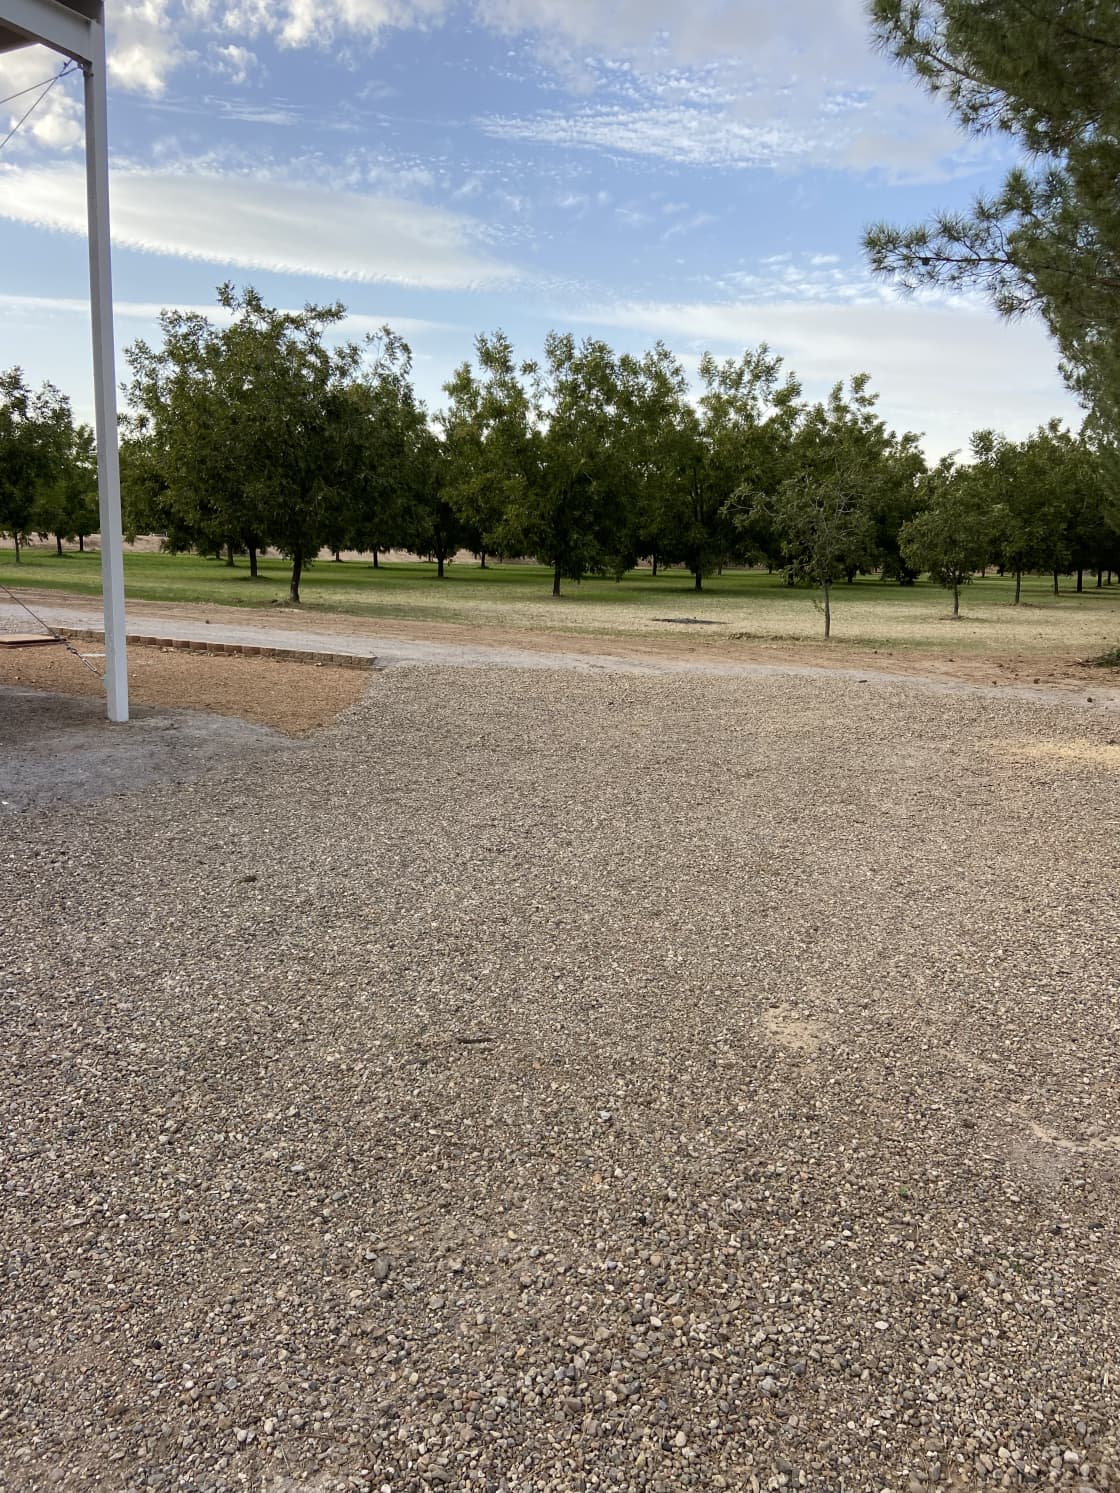 Our Pecan Orchard